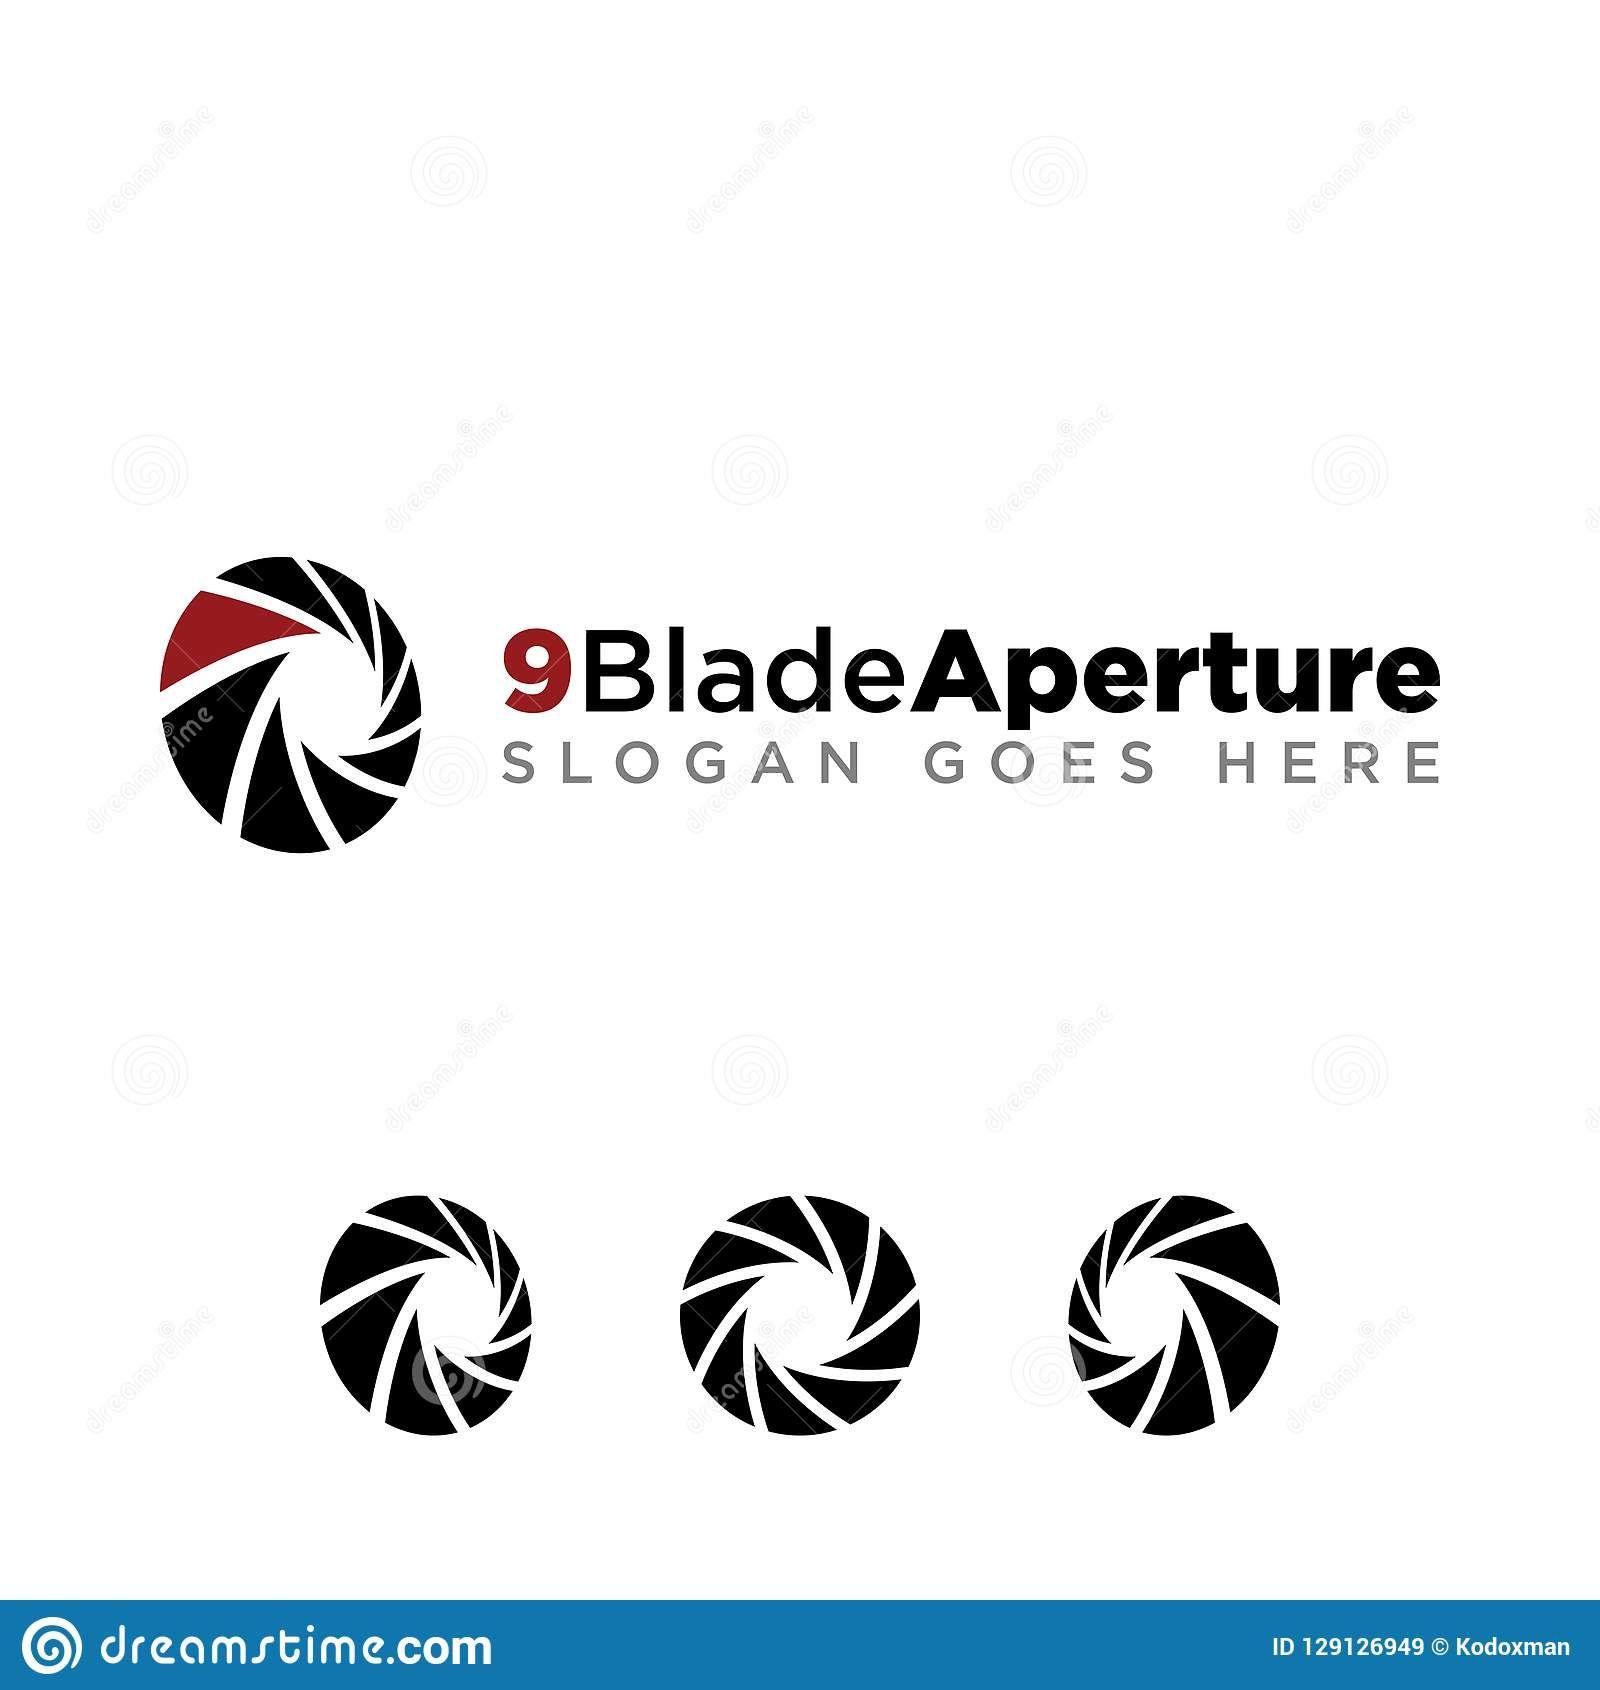 Red Blade Logo - Illustration about Aperture blade for photography company logo set